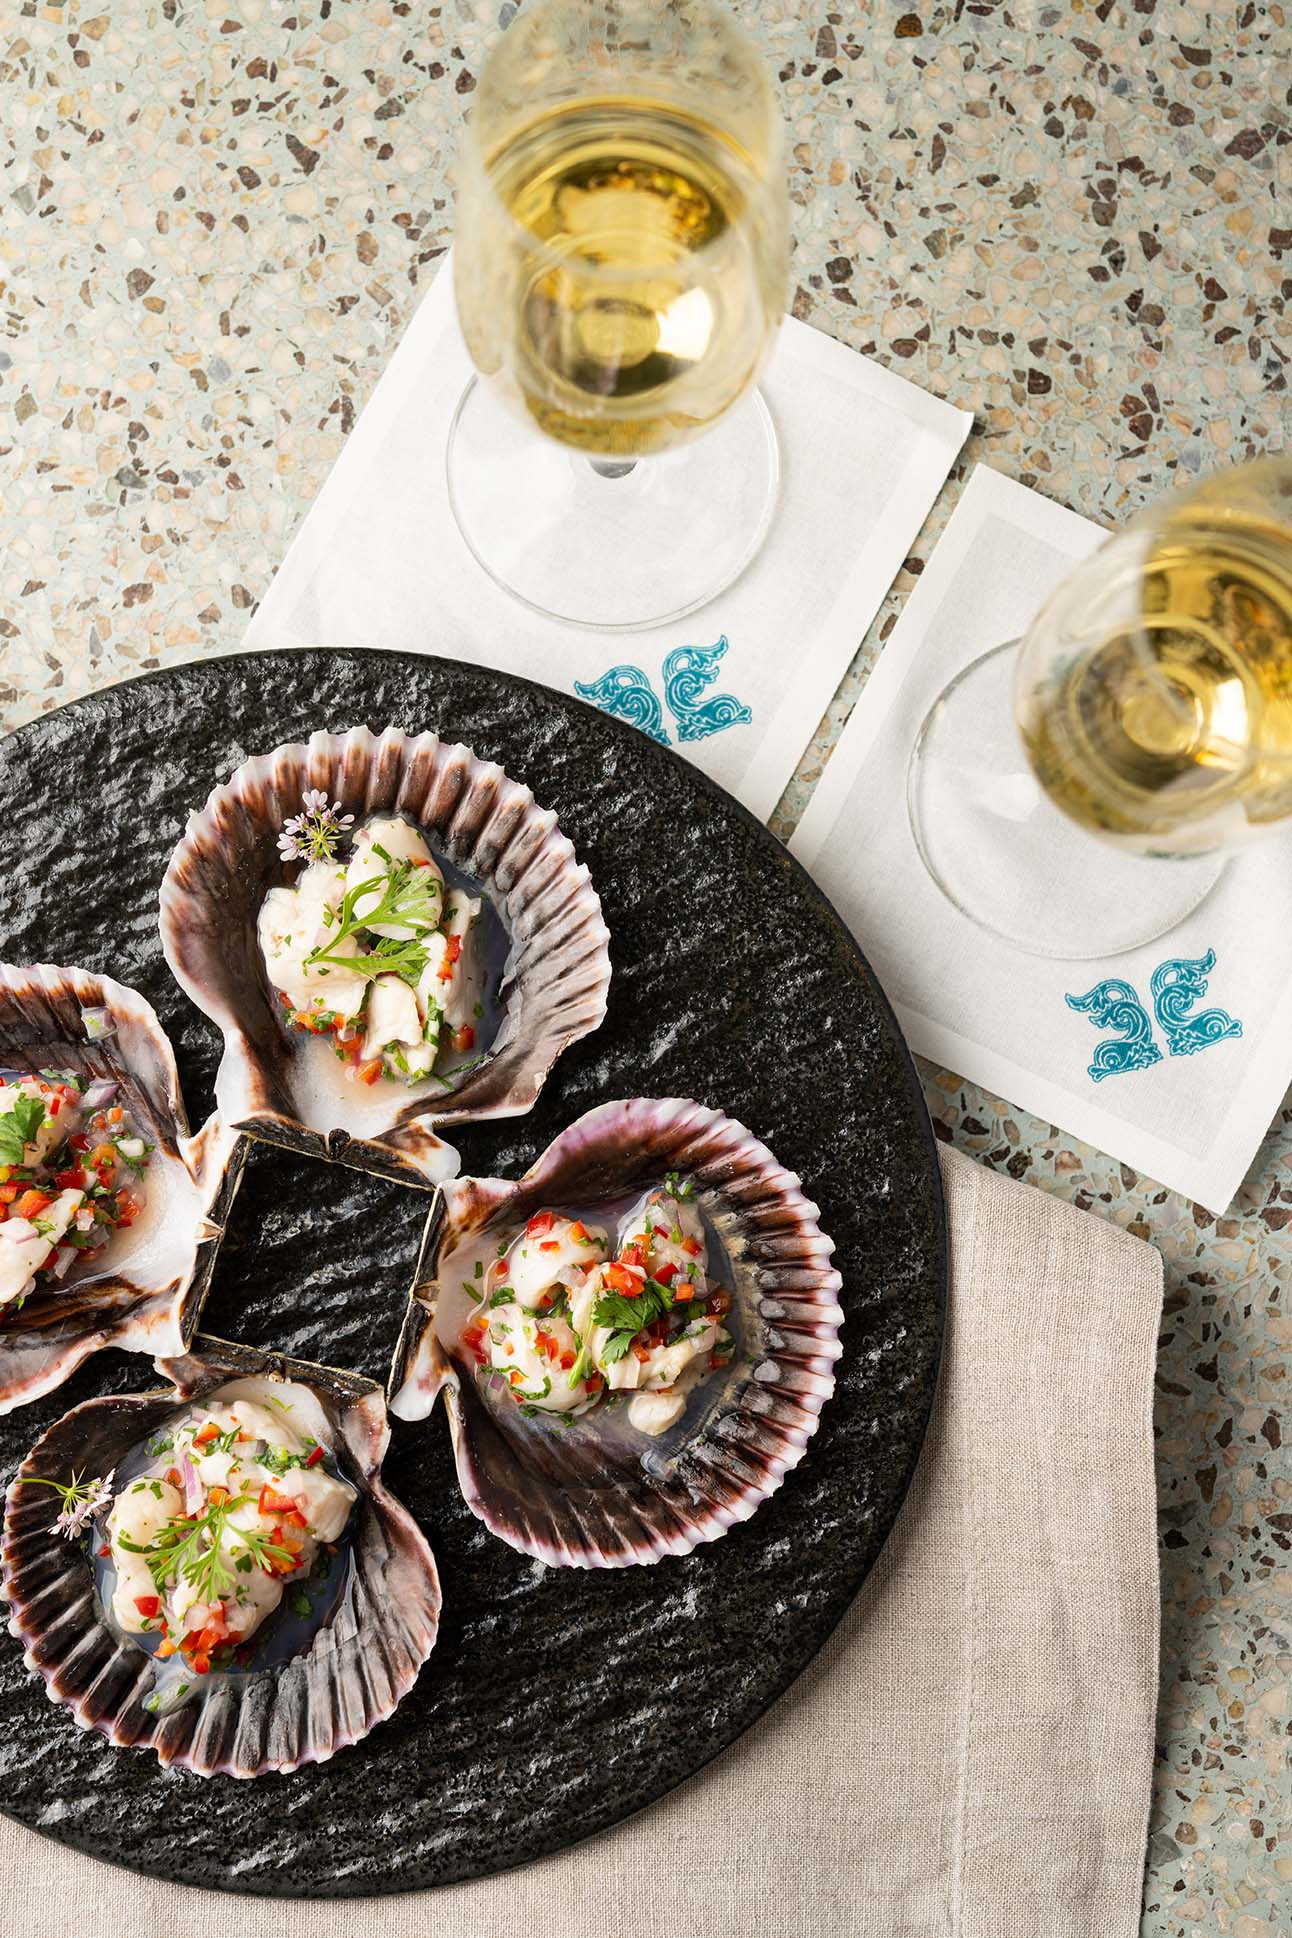 A fresh plate of seafood paired with two glasses of wine. A delicious meal contrasting the ocean breeze.